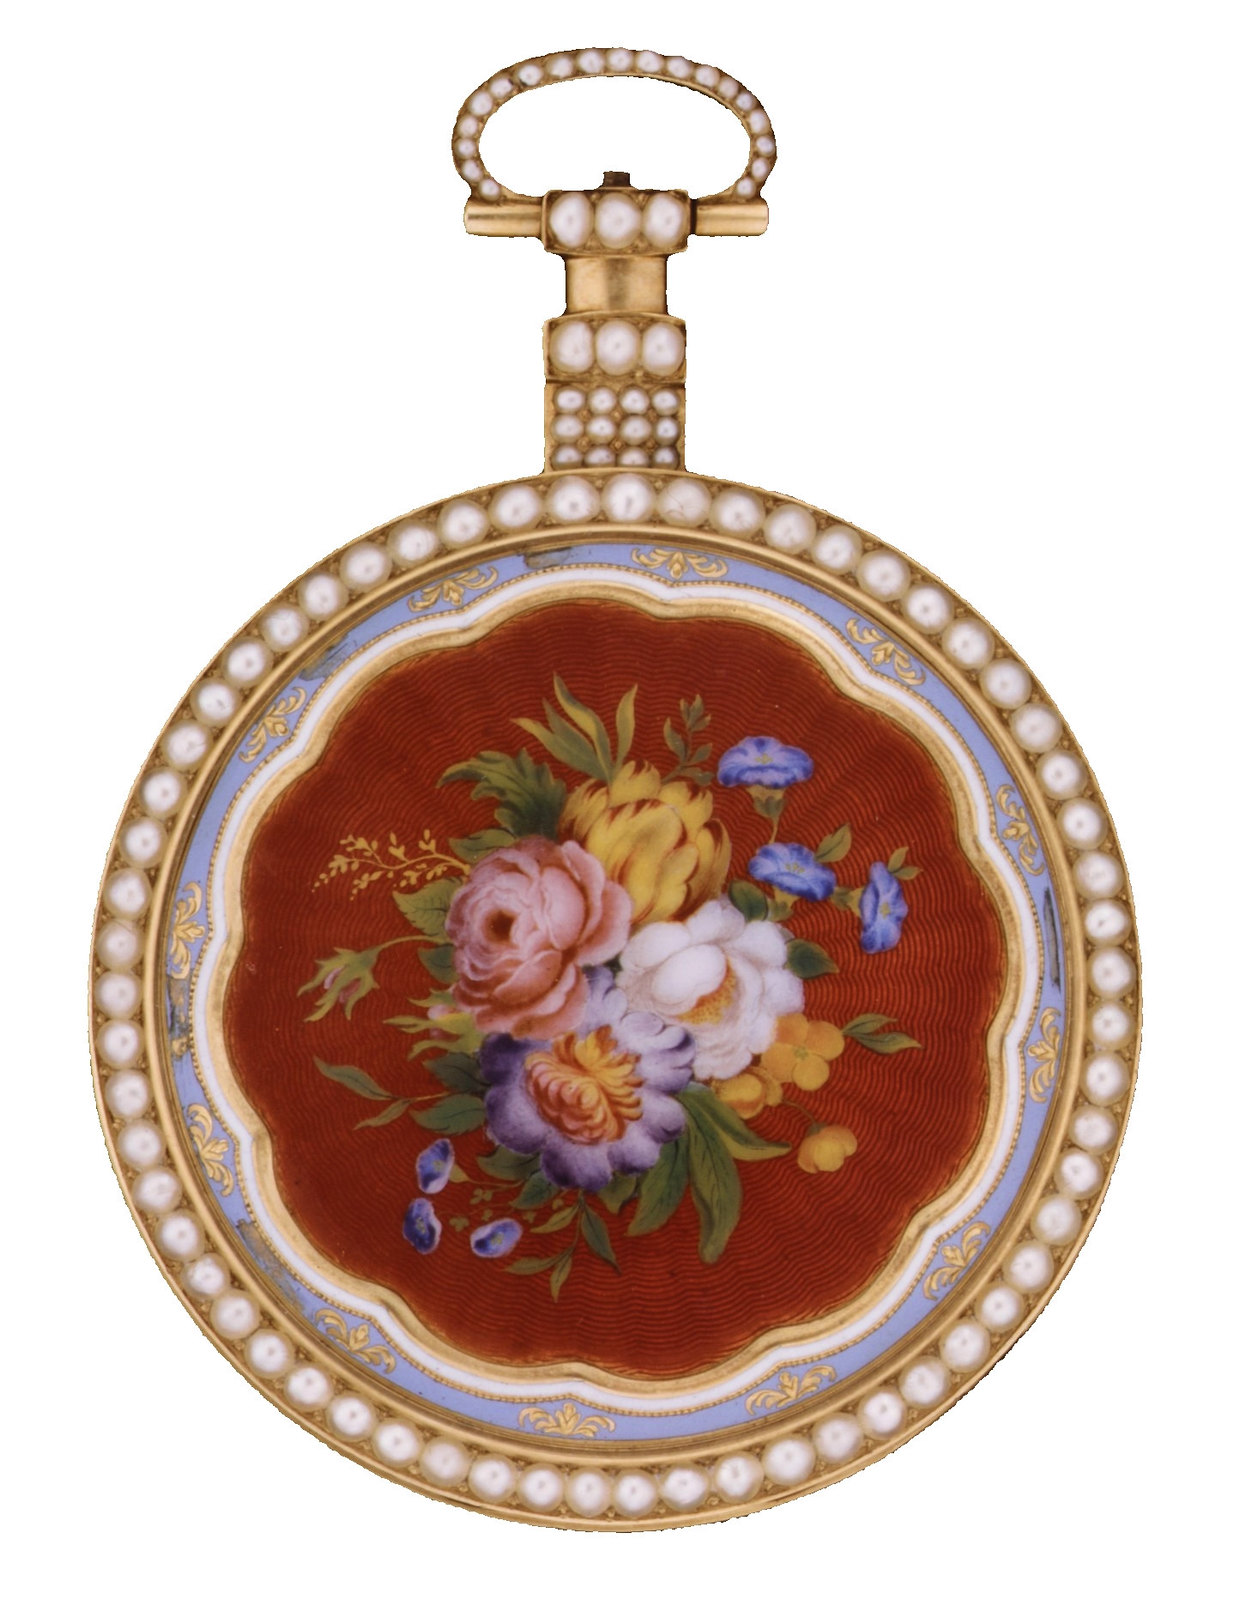 1819. Watch. British, London. Case of gold, enamel, and pearls, with floral design; jeweled movement, with ruby cylinder escapement. metmuseum